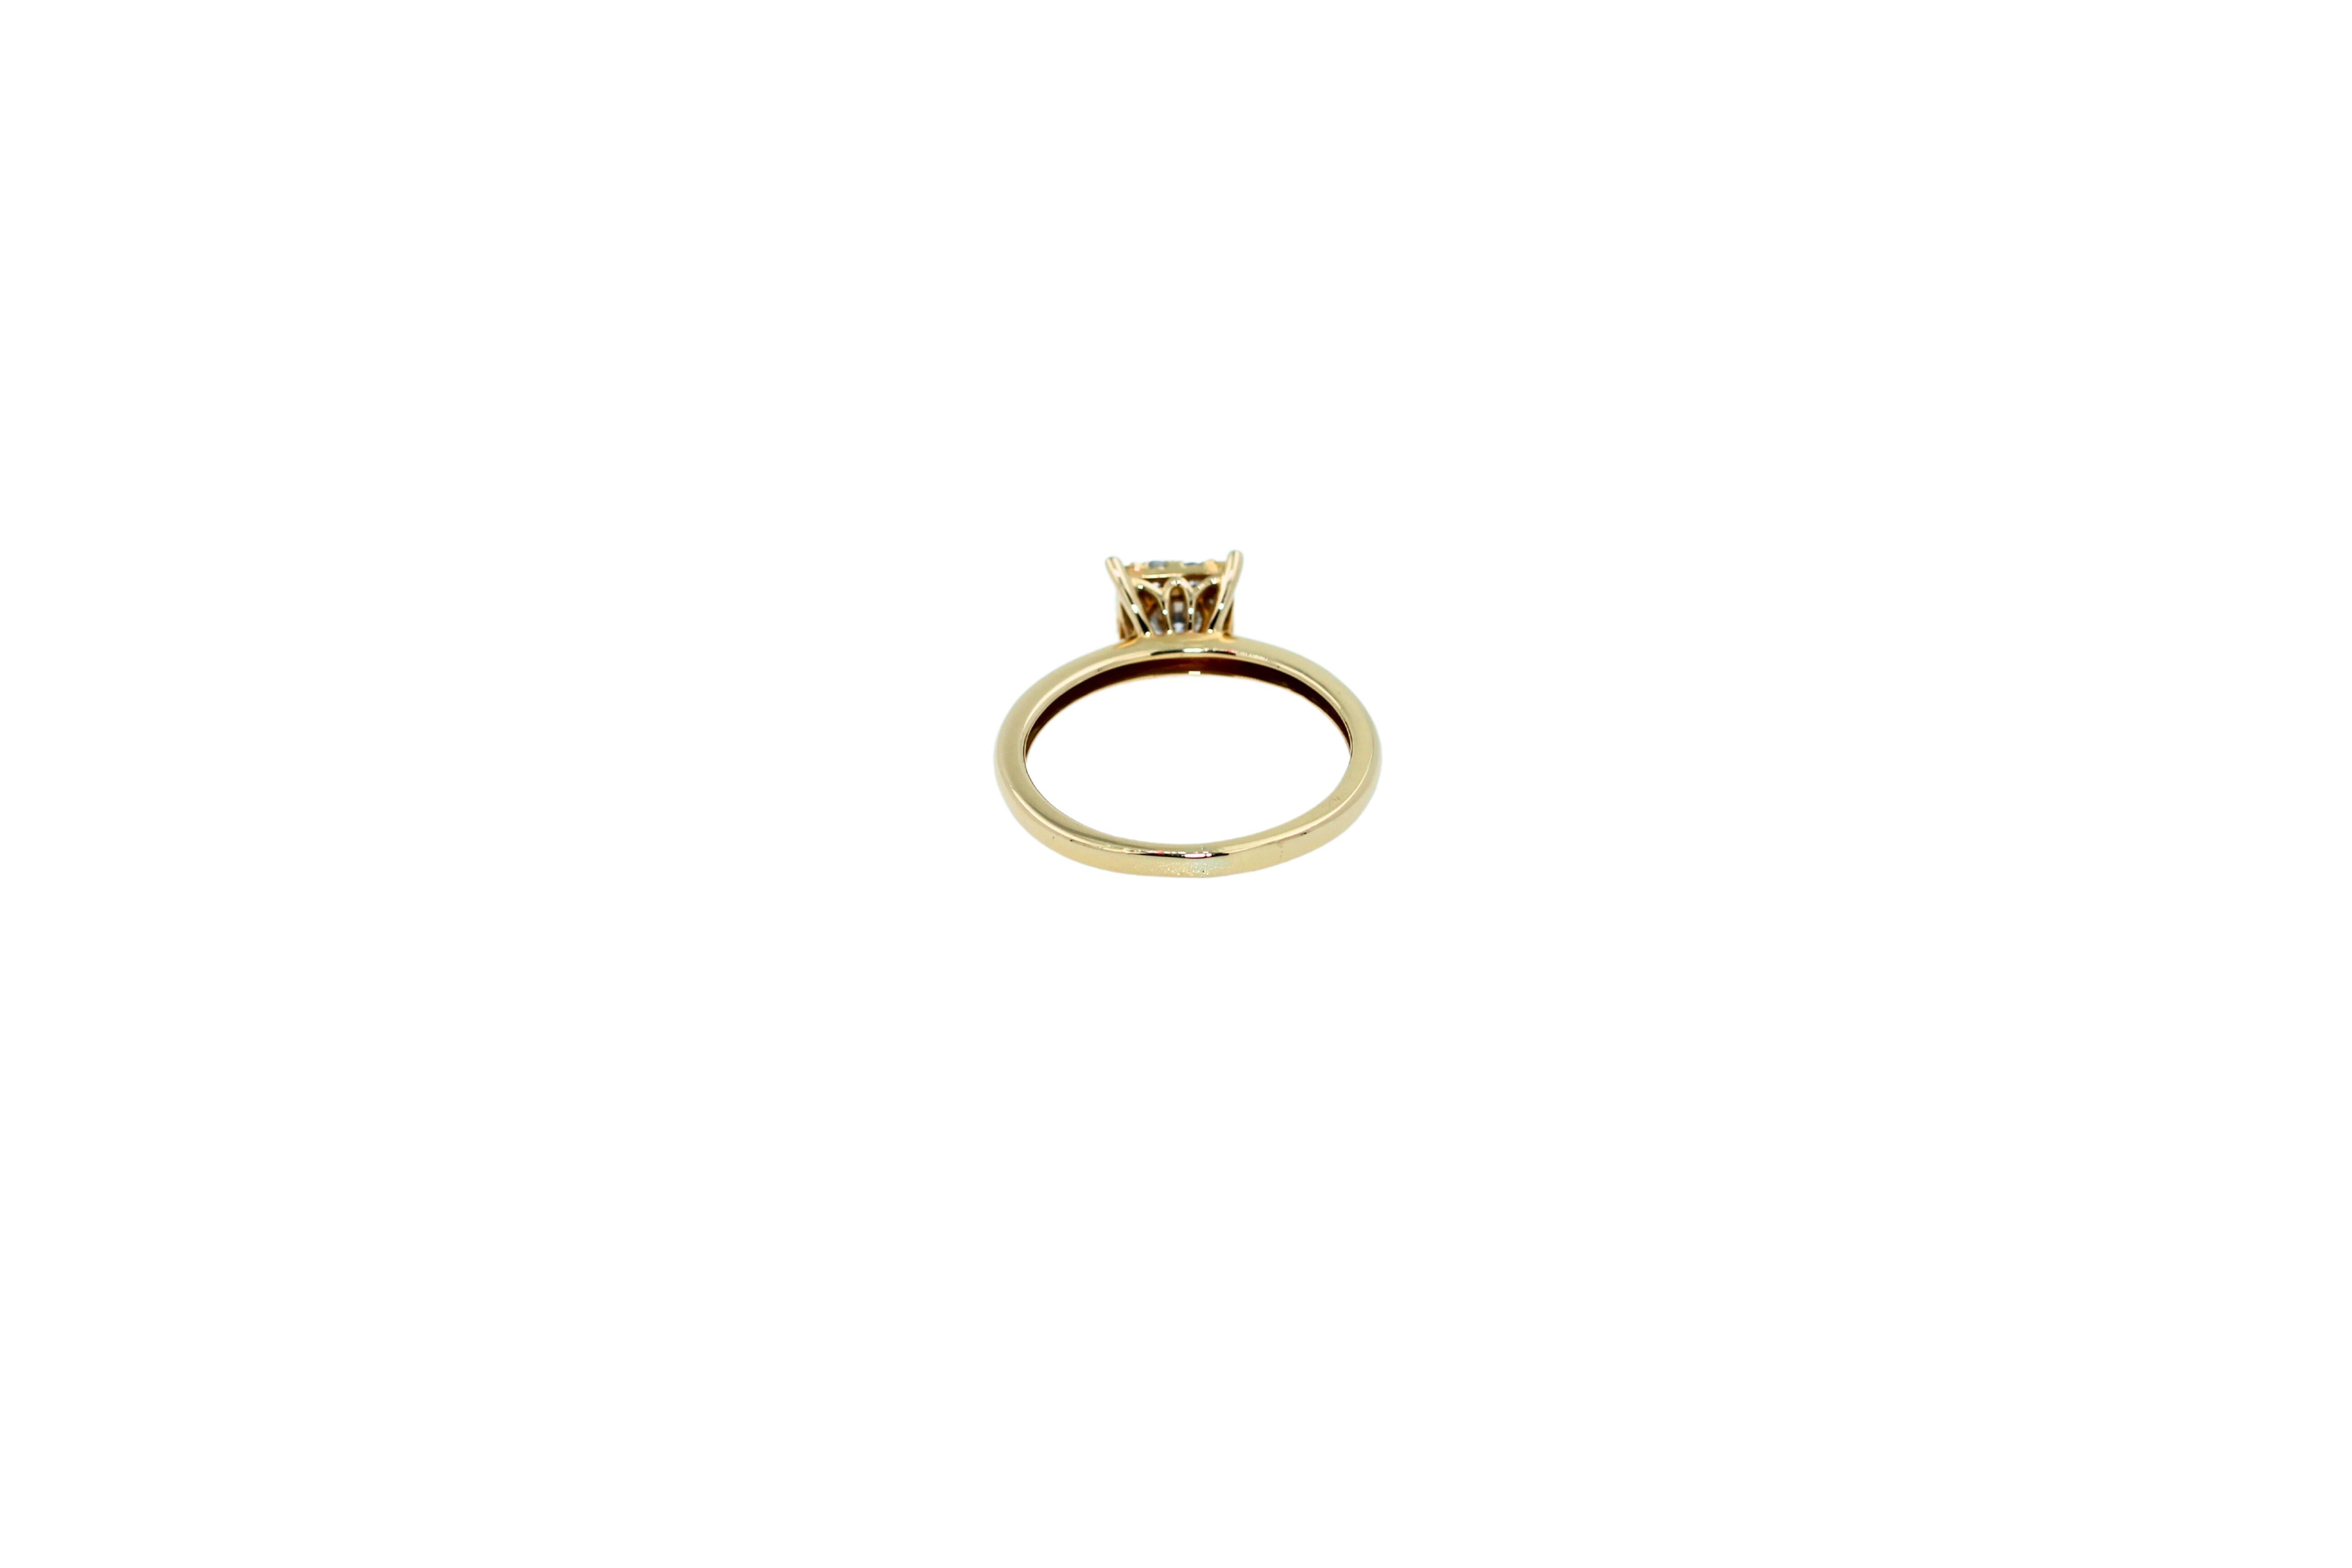 0.50 Carats Diamond Square Halo Round Pave Engagement Cocktail Yellow Gold Ring
0.50 Carats of Pave GH/VS Diamonds
Very Brilliant & Sparkly Diamonds
14K Yellow Gold
Great Value
Size 7 - Resizable Upon Request